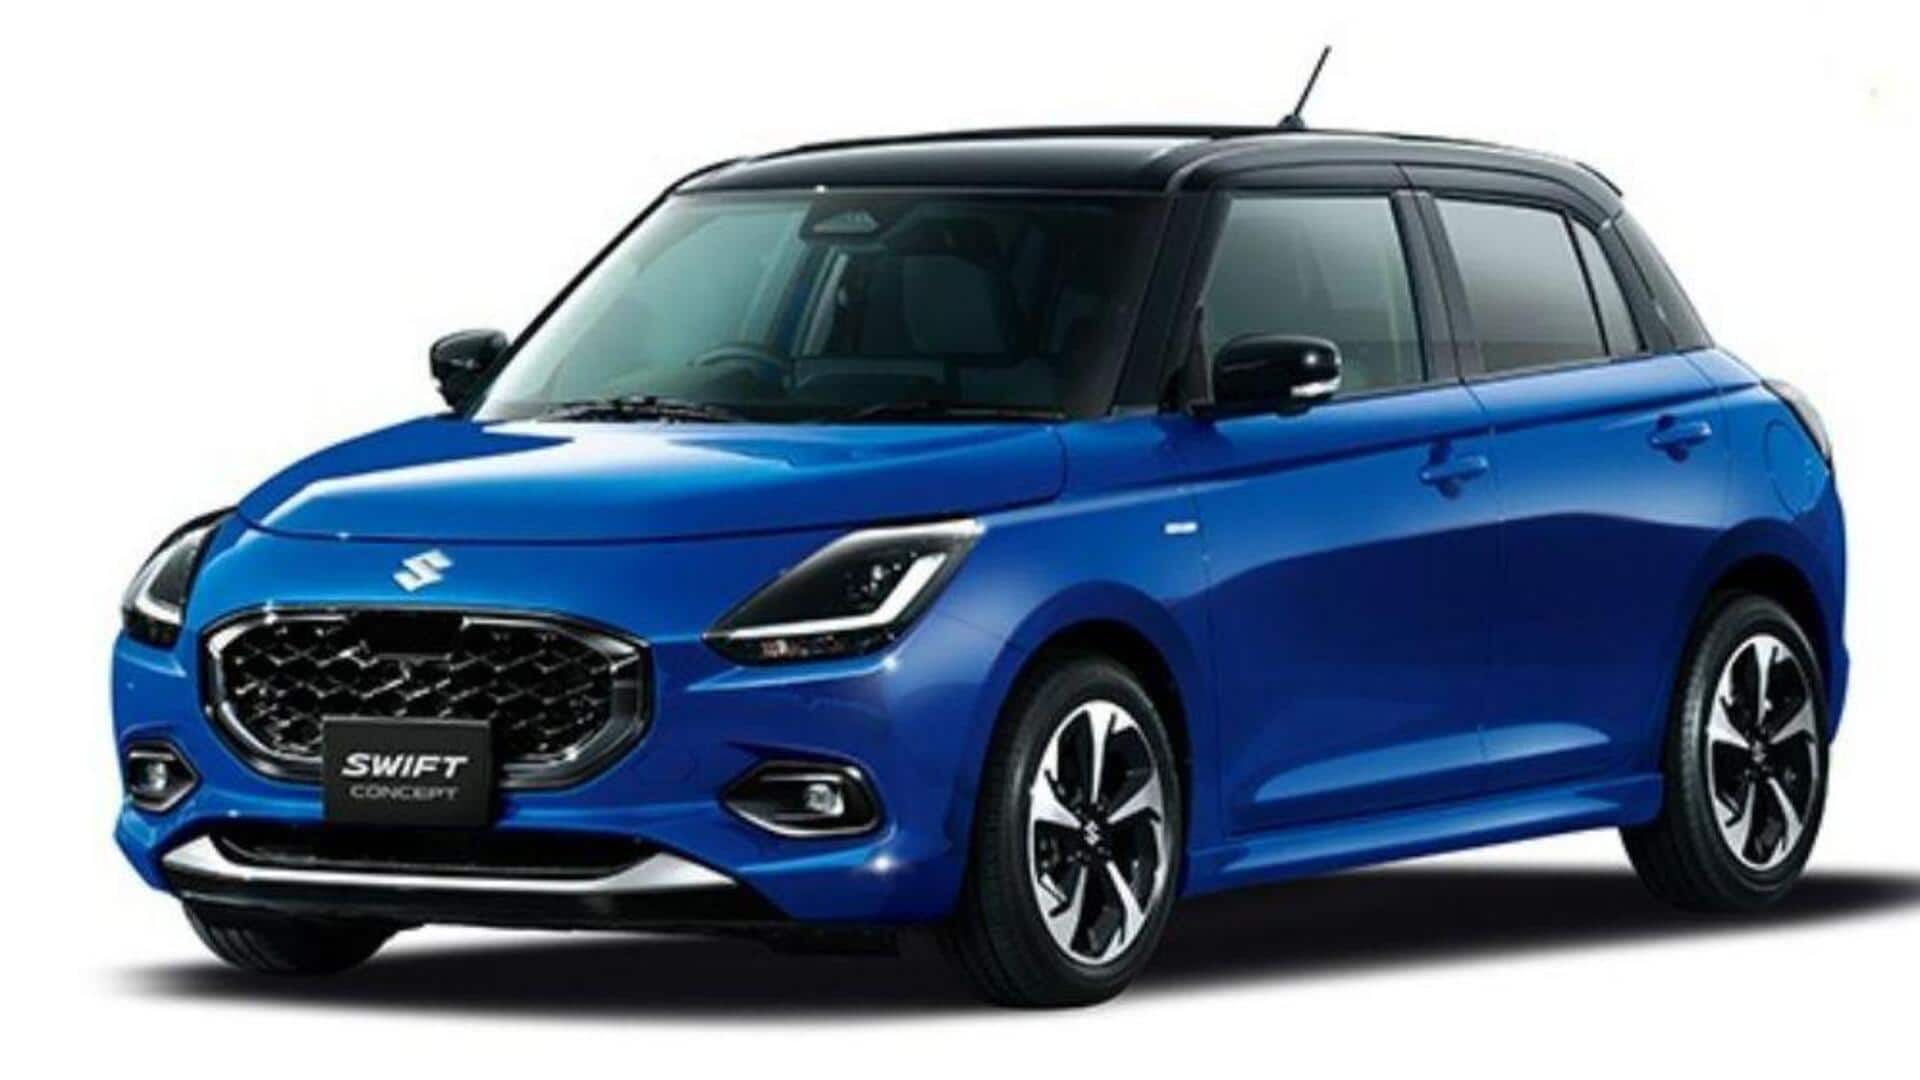 Suzuki Swift Concept previews hatchback coming to India in 2024